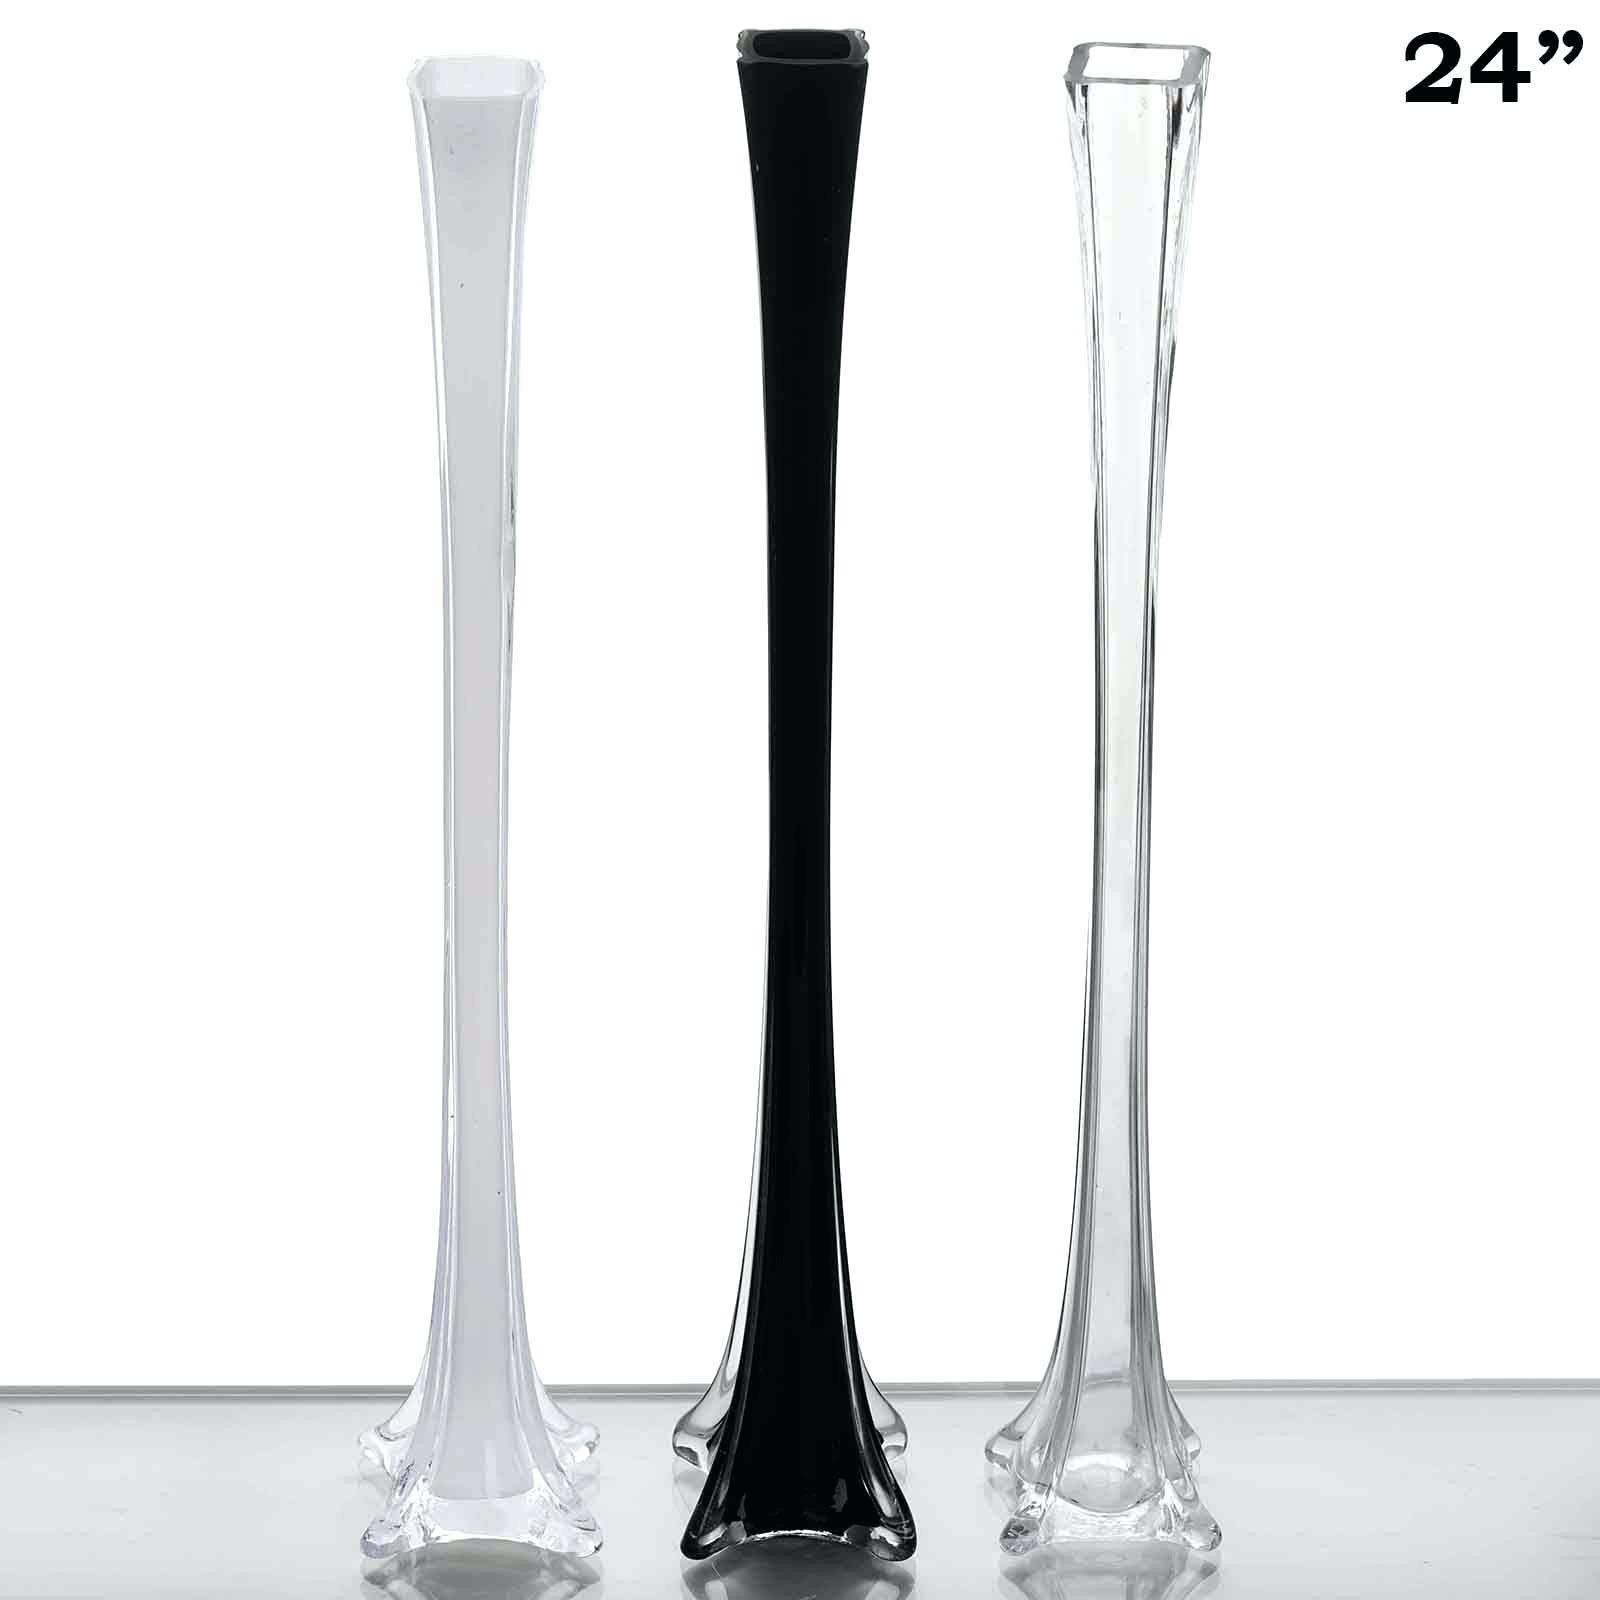 23 Perfect Small Hurricane Vase 2024 free download small hurricane vase of fantastic chair decor ideas from living room vases wholesale awesome within fantastic chair decor ideas from living room vases wholesale awesome cheap glass vases 1h 